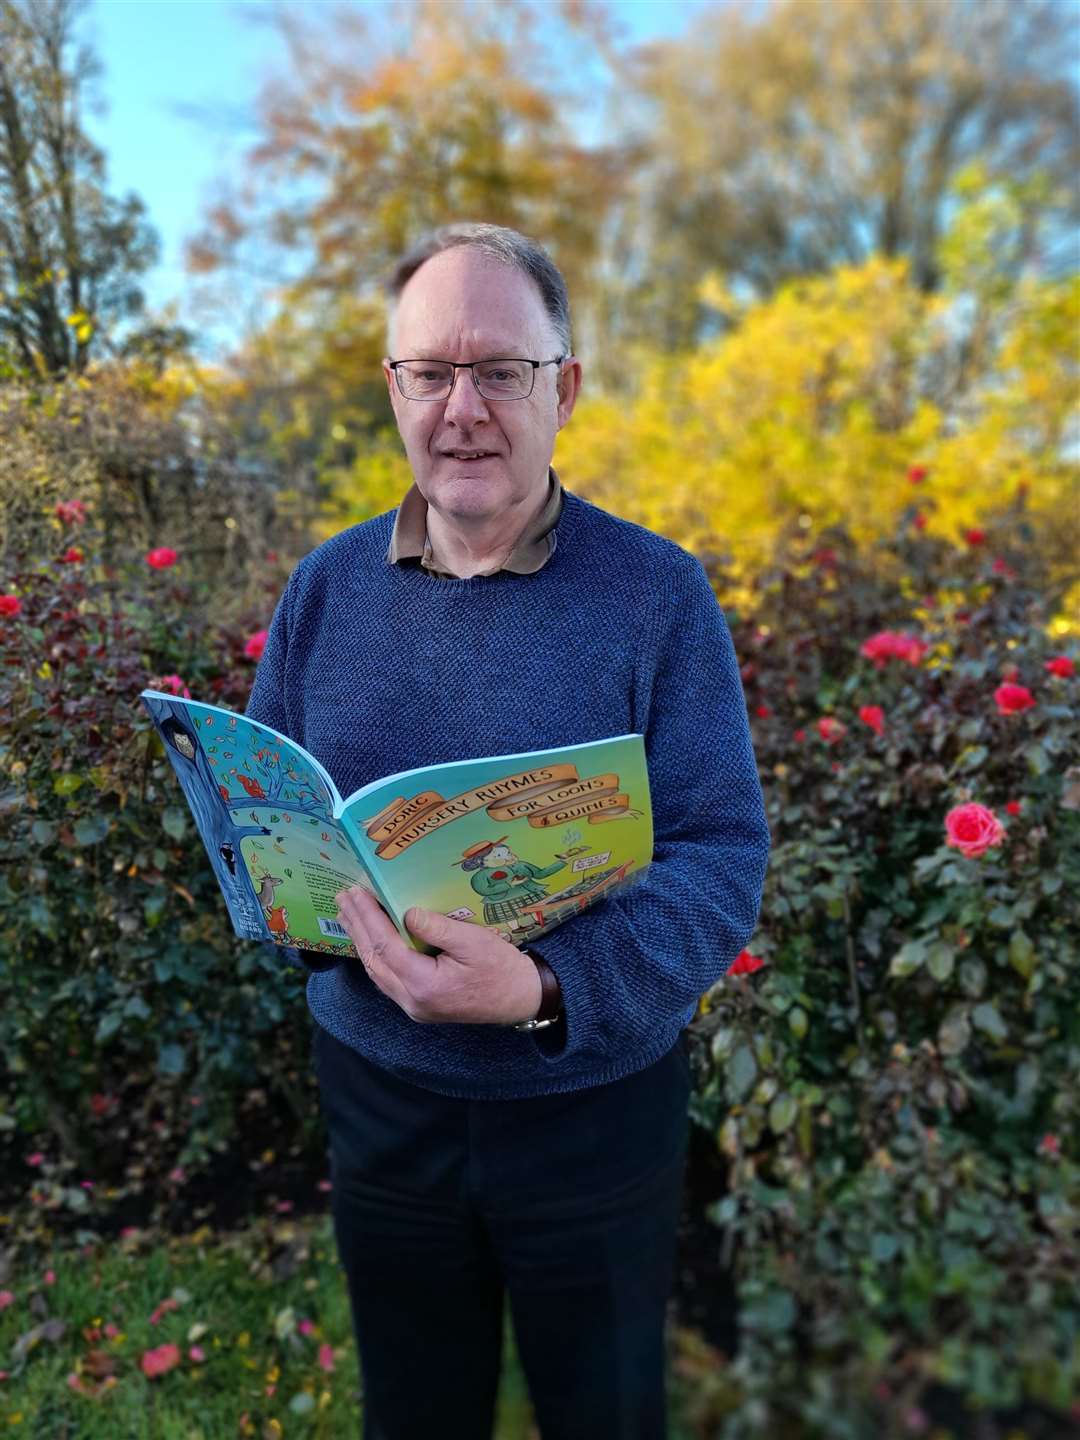 Author Gordon M Hay with his new book Doric Nursery Rhymes for Loons & Quines.